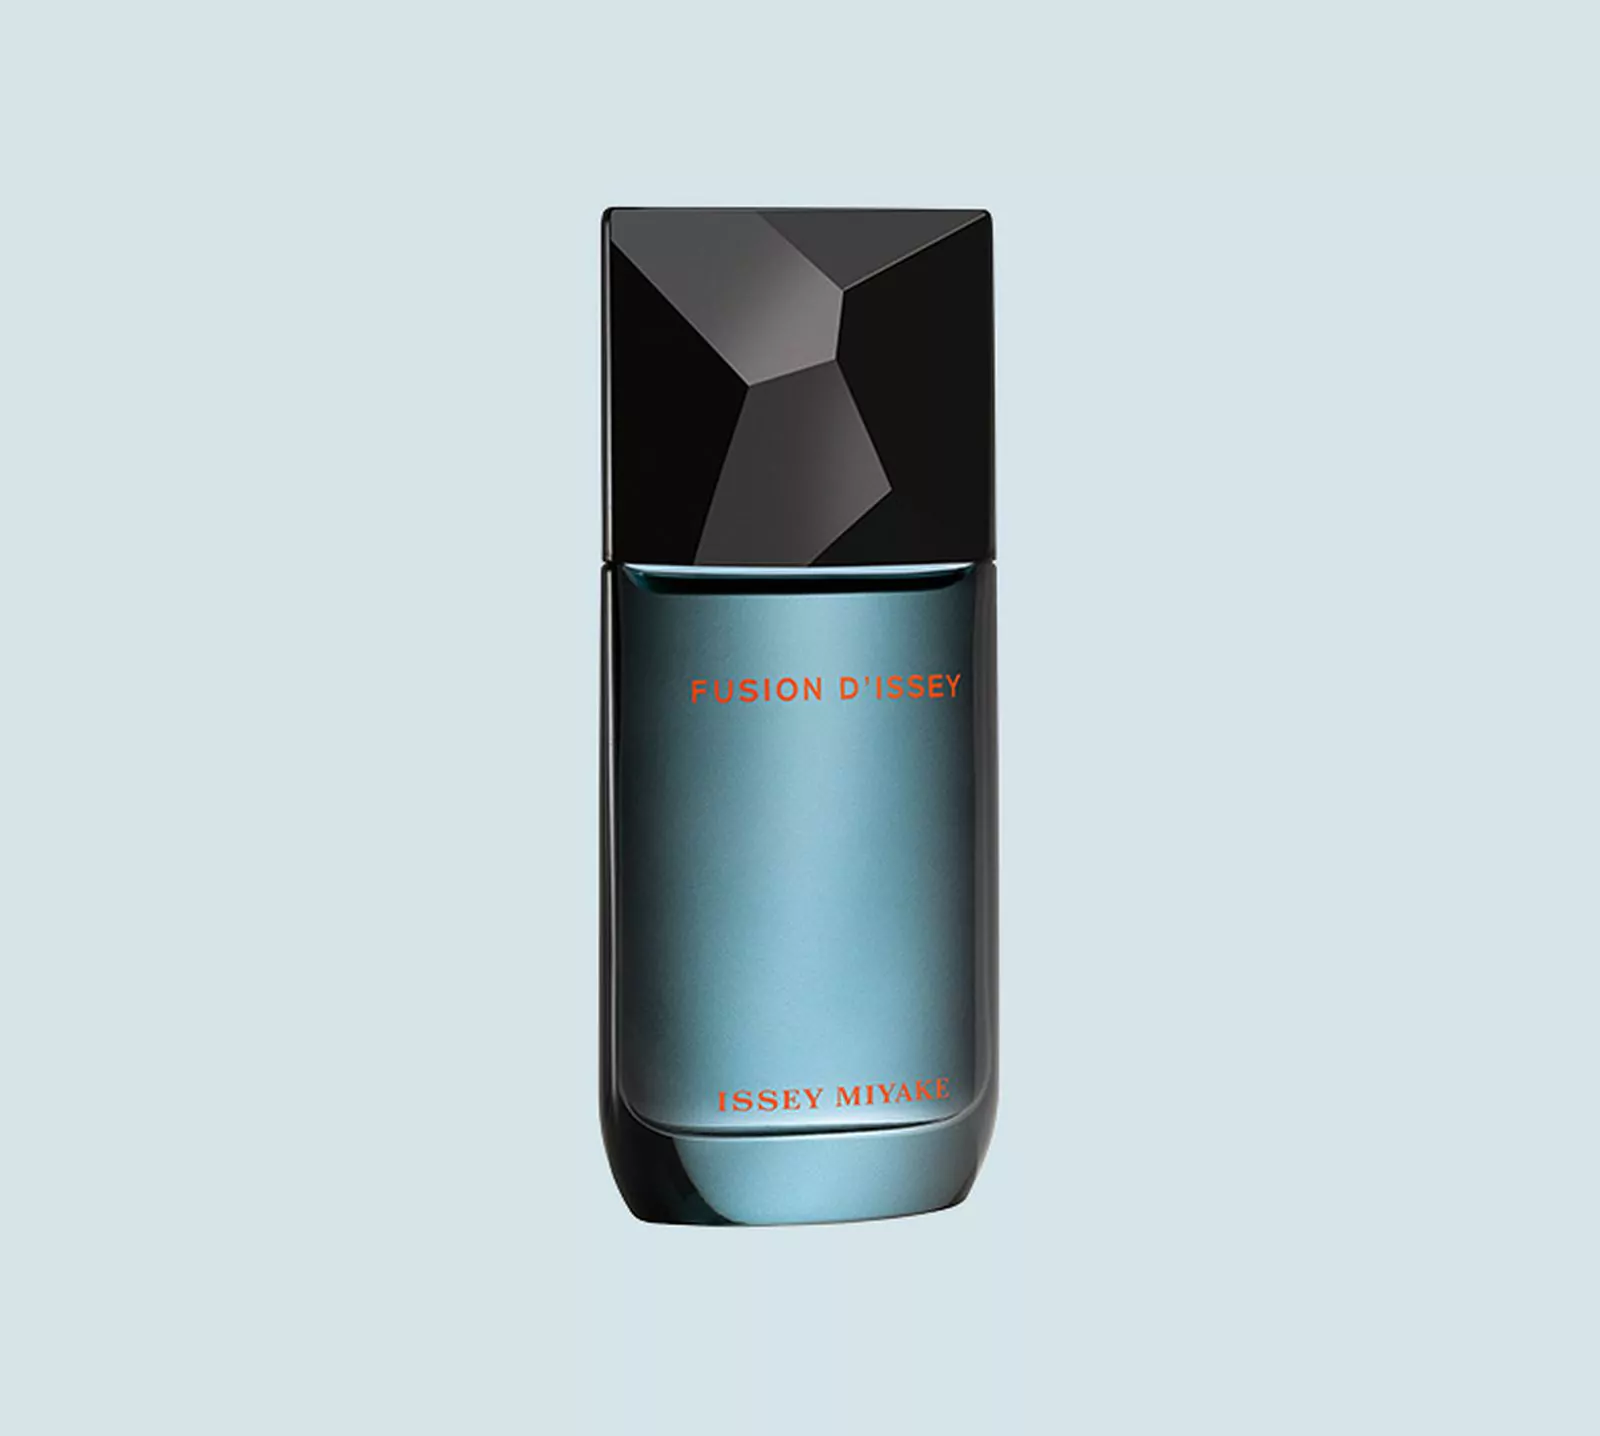 Issey Miyake, Fusion d'Issey